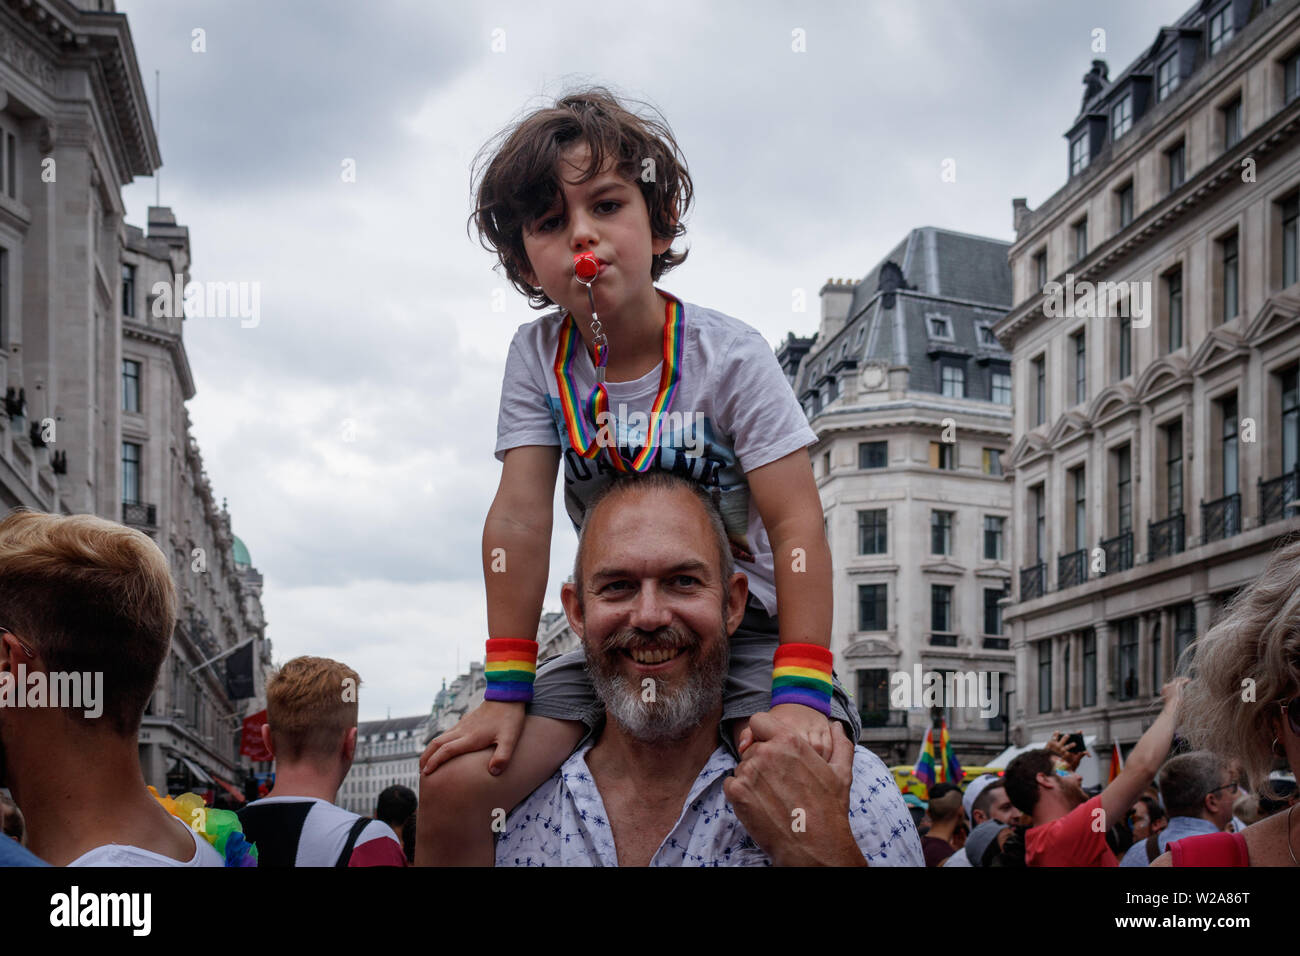 A kid on top of the father's shoulders, with rainbow colours, blows a whistle, during the parade.The Pride in London 2019 Parade Day is a London-based event held by Pride in London. It is a parade of people of all genders, sexualities, races, nationalities, backgrounds and faiths coming together for the UK’s biggest Pride celebration. Central London was covered in rainbow-themed decorations, signifying inclusiveness. Stock Photo